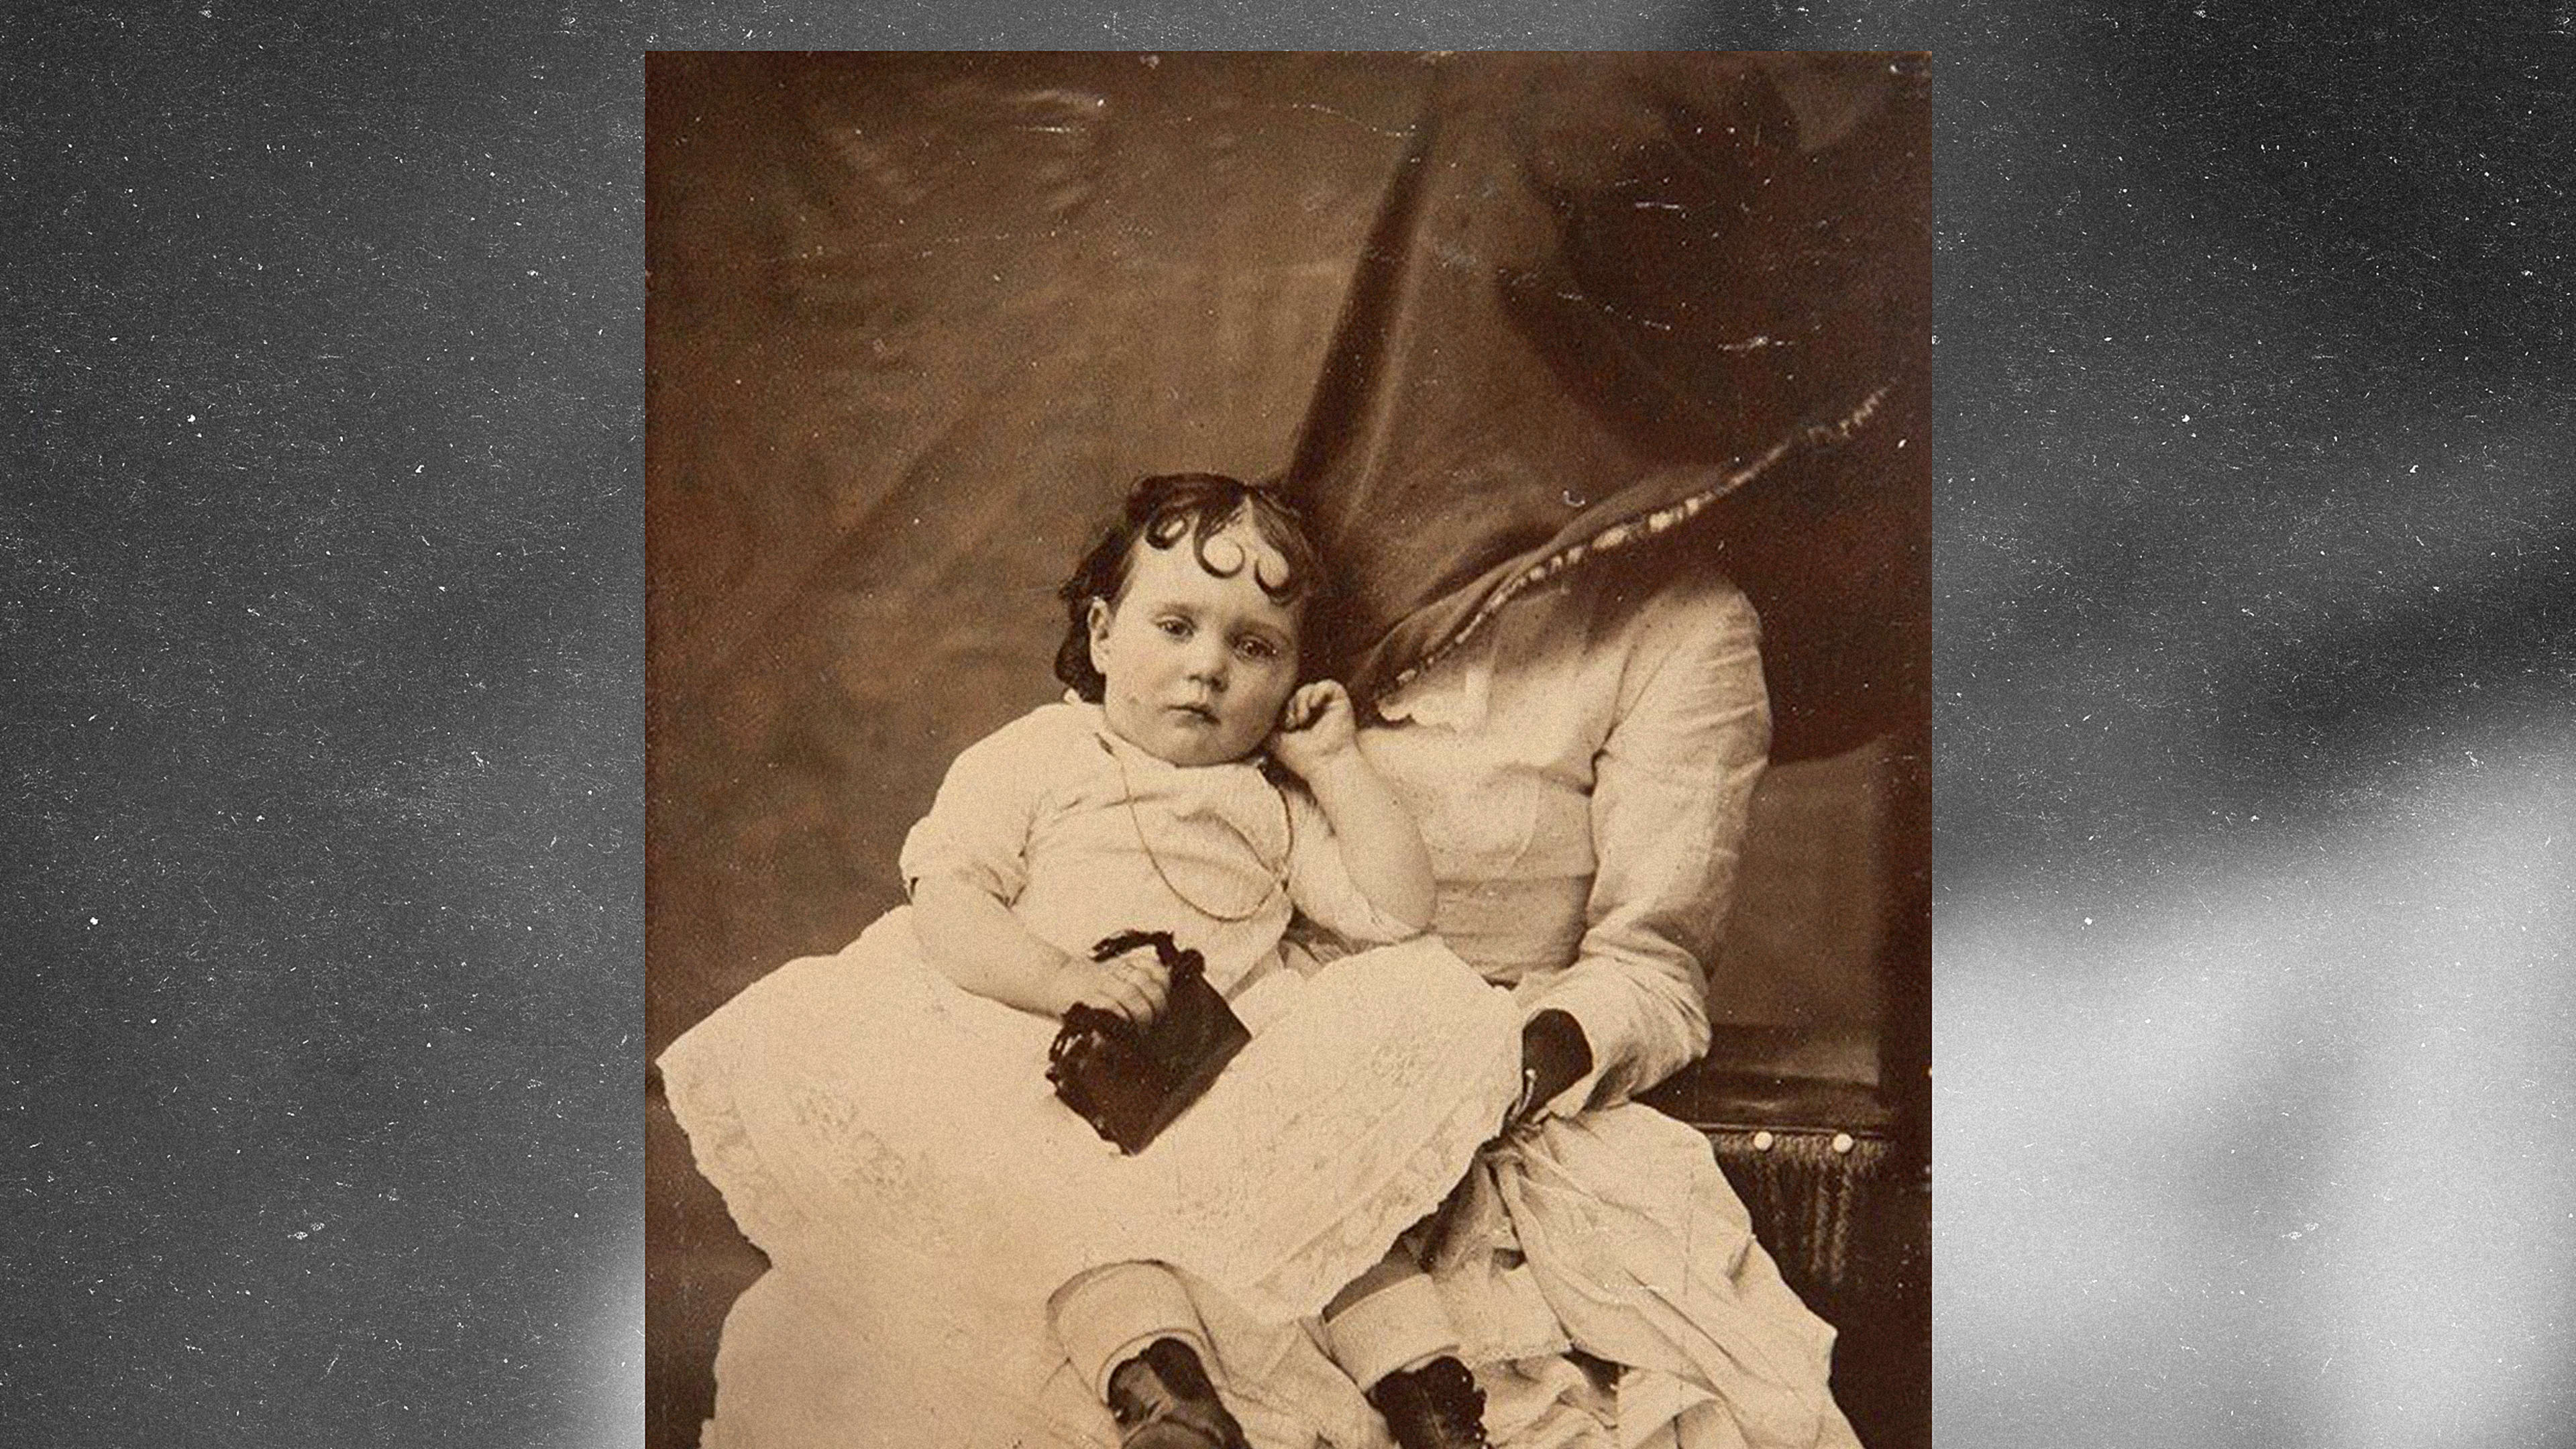 A look at ‘hidden mother’ photos this Mother’s Day